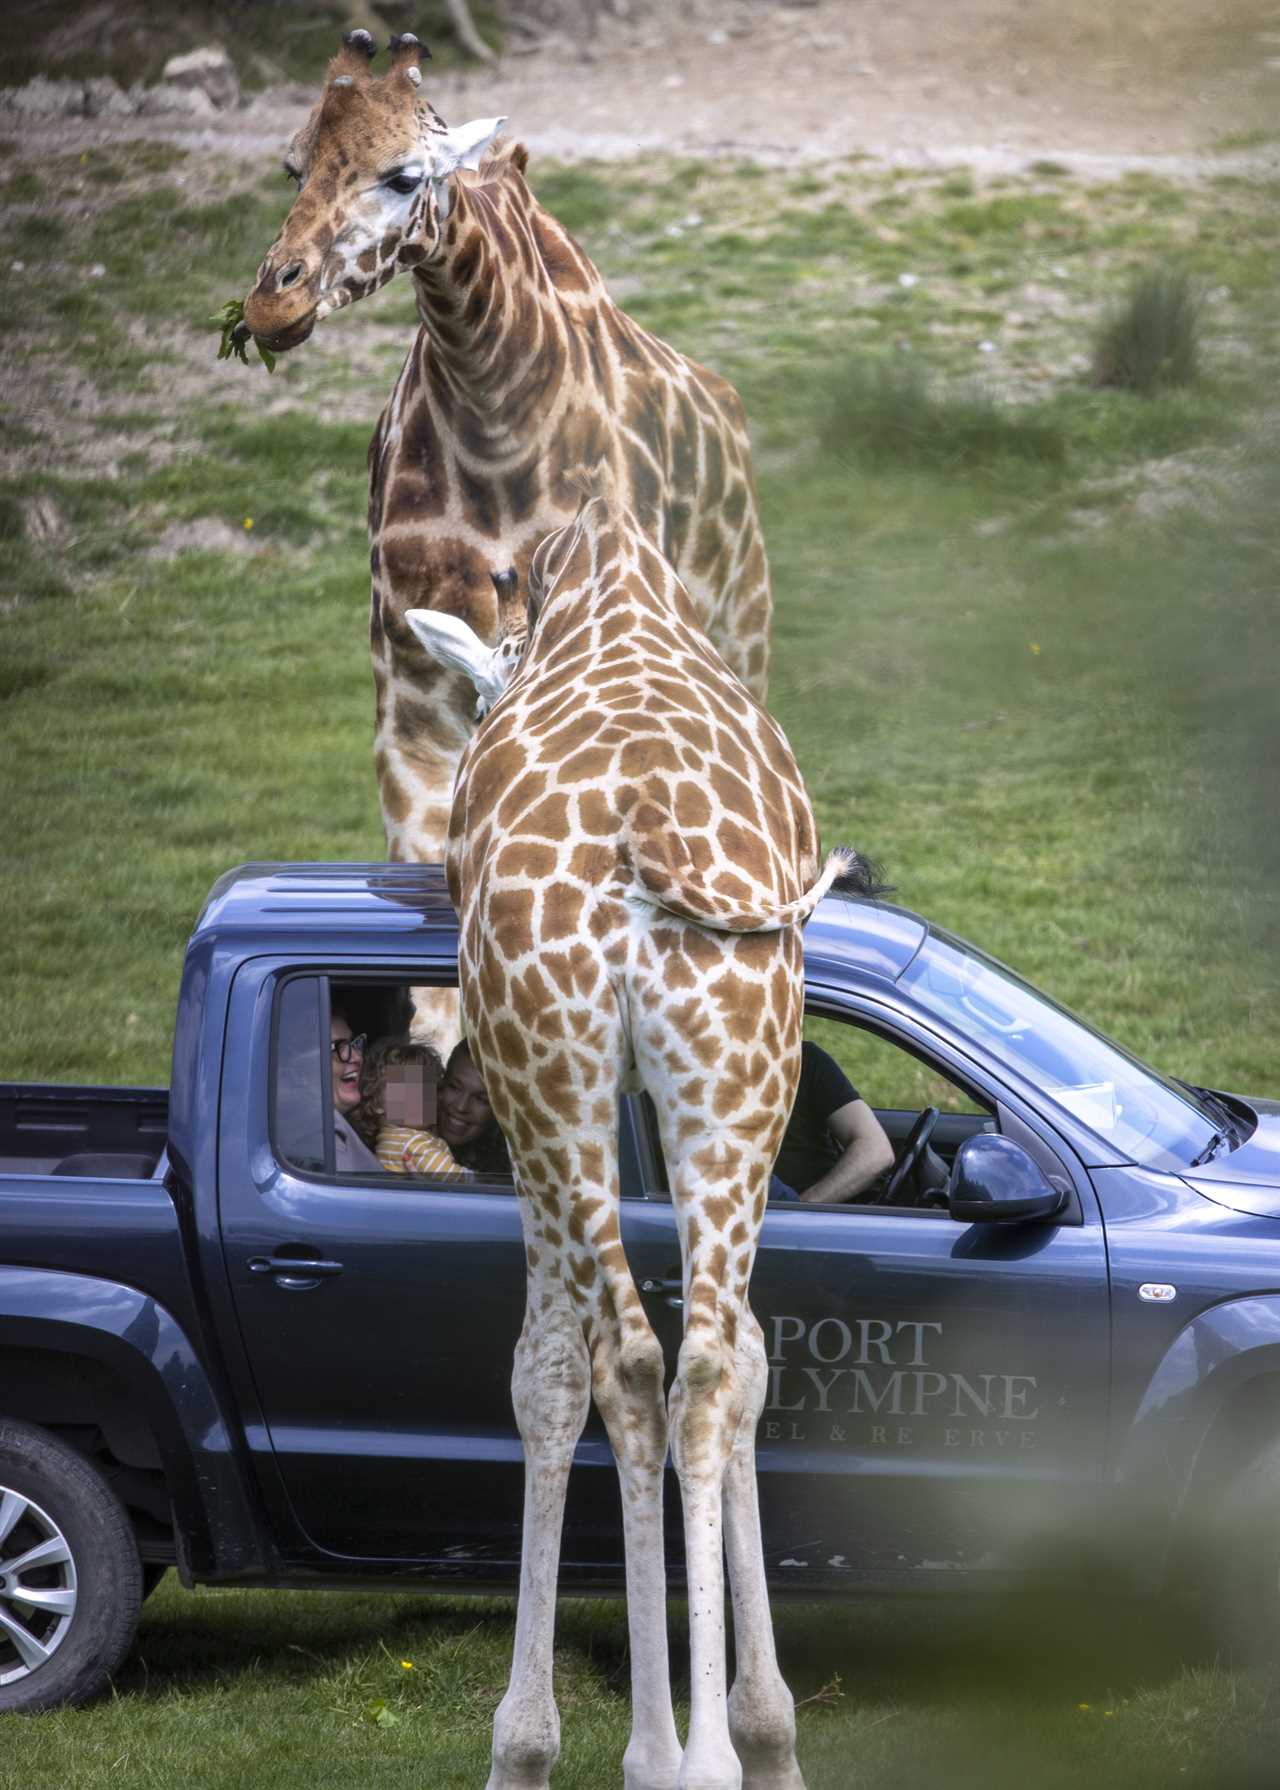 Carrie Johnson’s son Wilfred squeals with joy as giraffes approach him at safari park